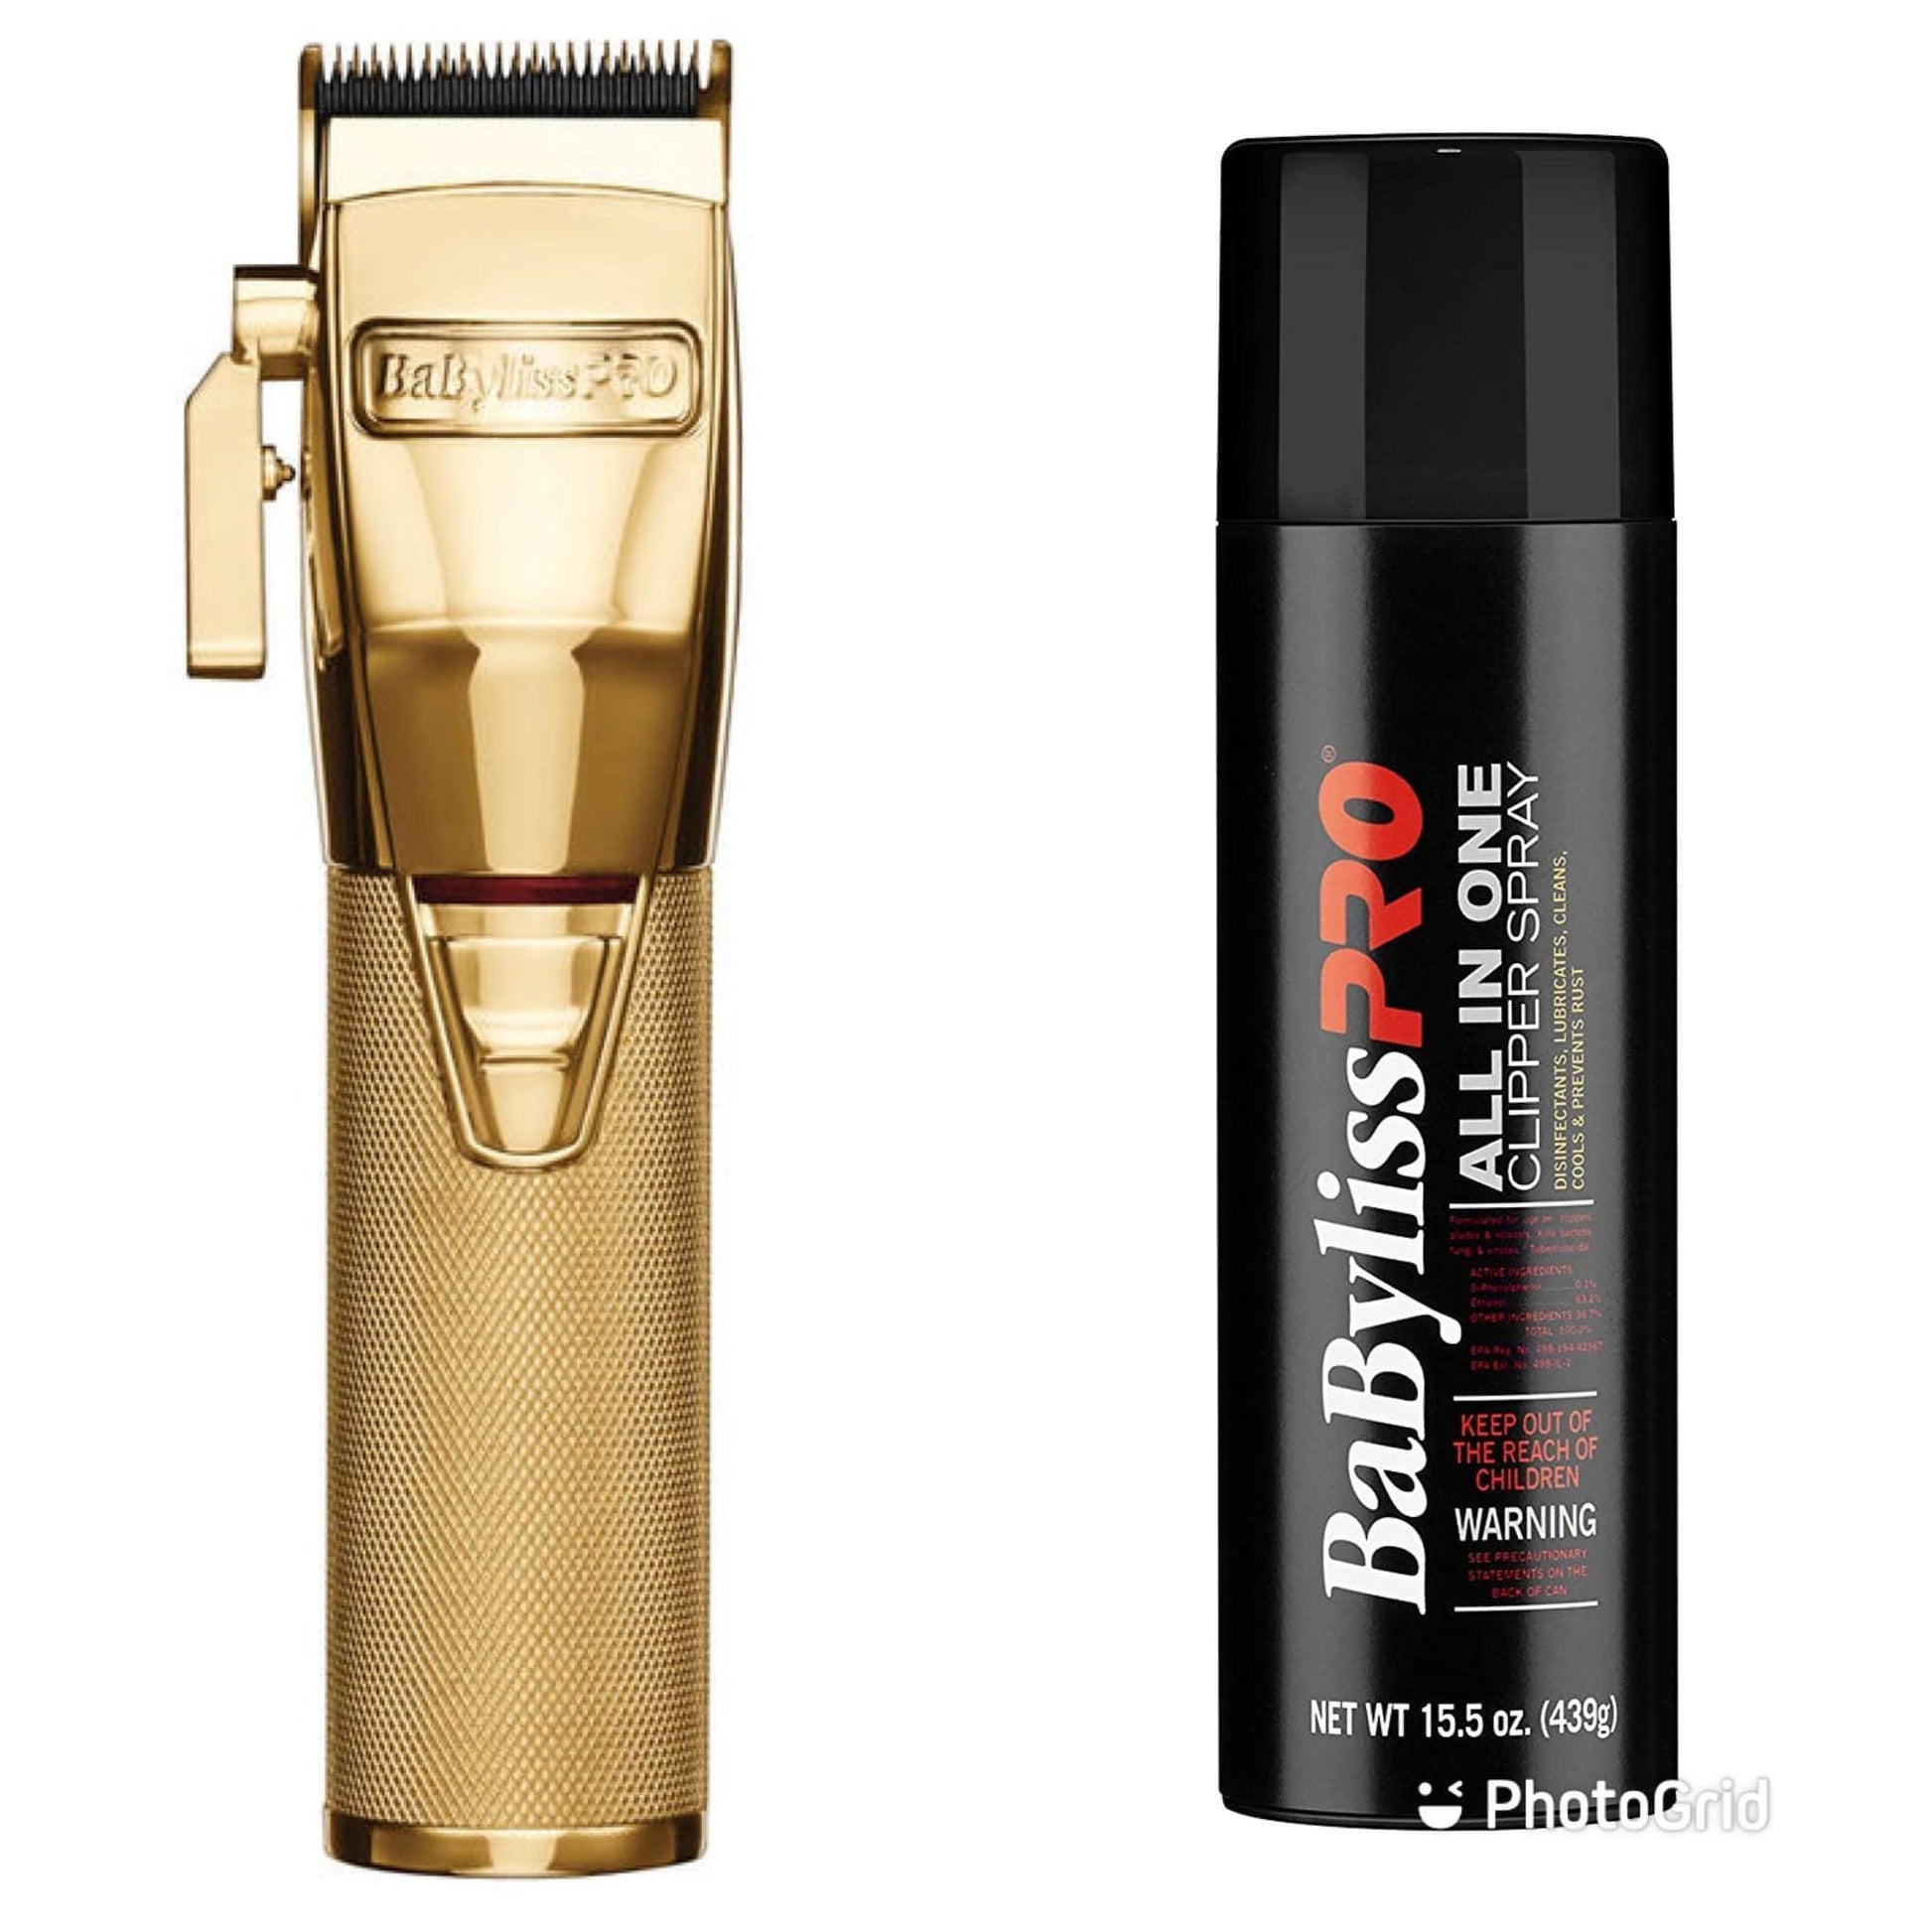 BaByliss Pro FX870 Clippers + Clipper Spray Bundle (Combo)-Clipper Vault